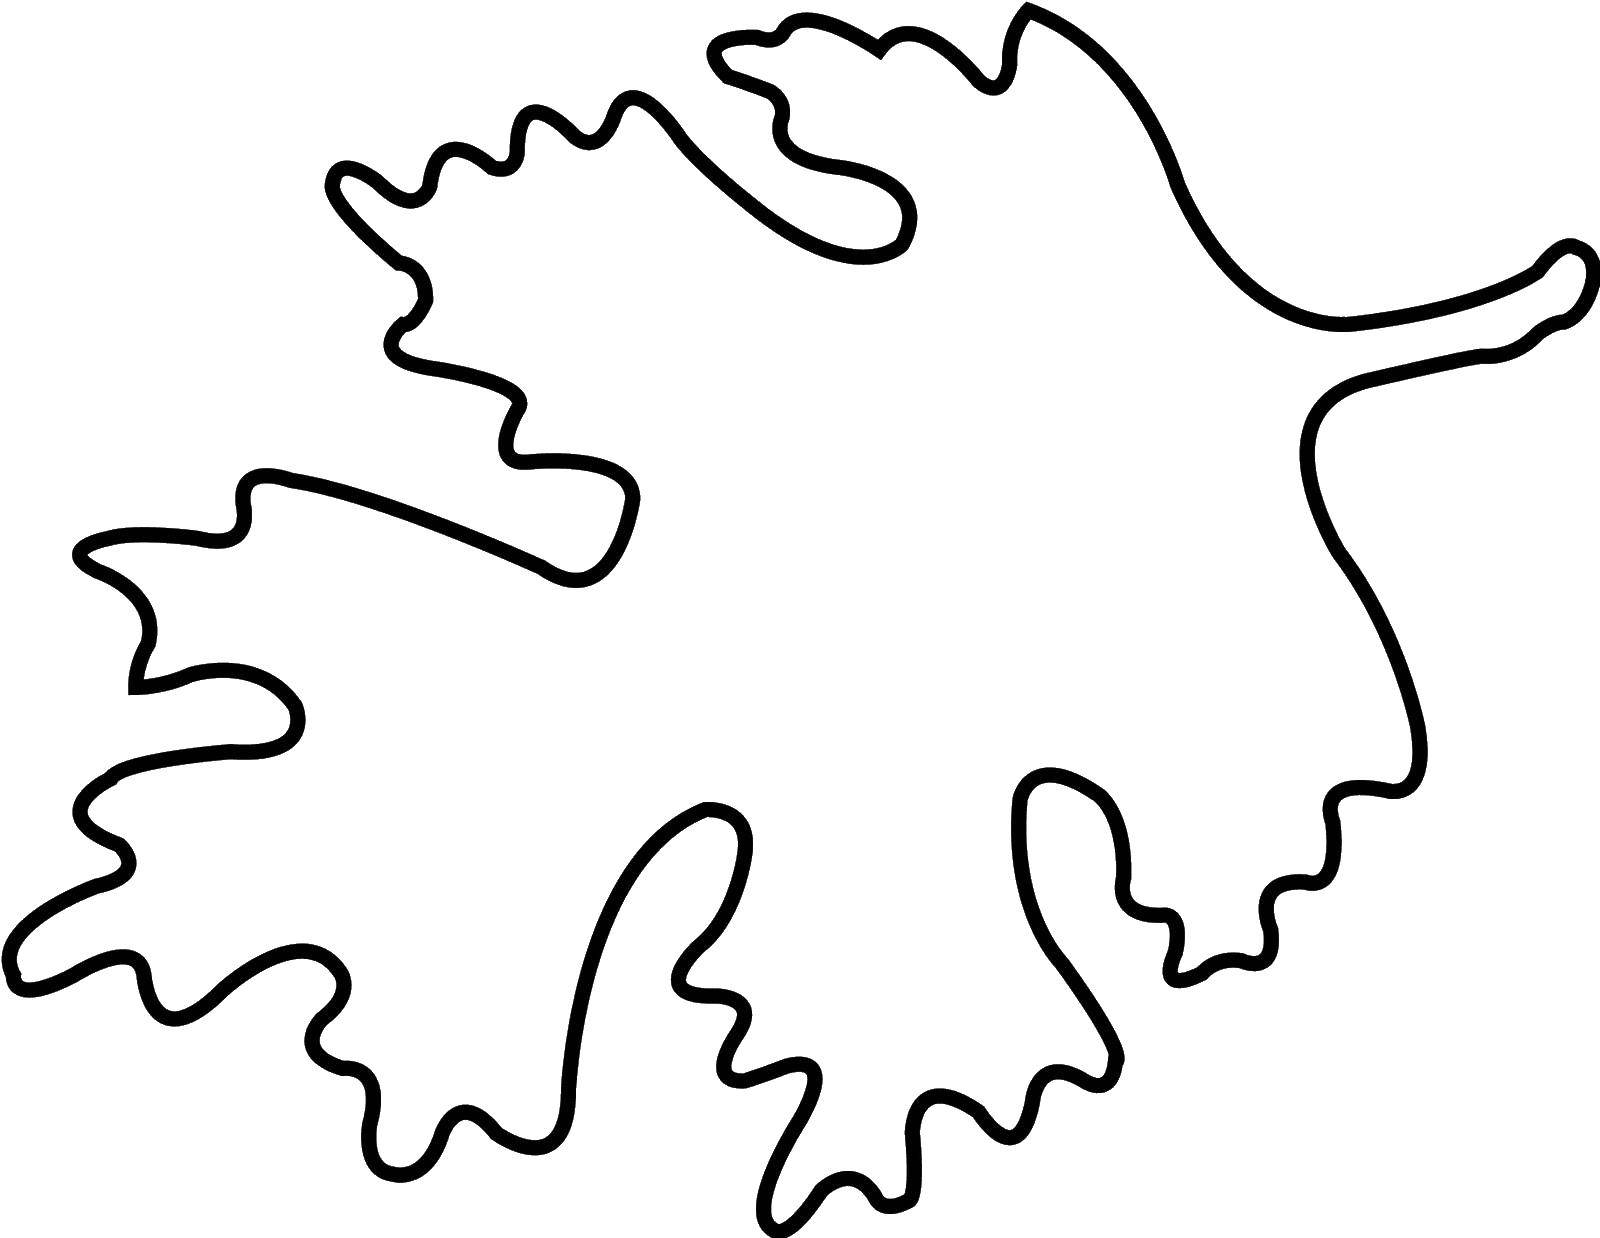 Coloring Oak leaf. Category The contours of the leaves of the trees. Tags:  leaf.